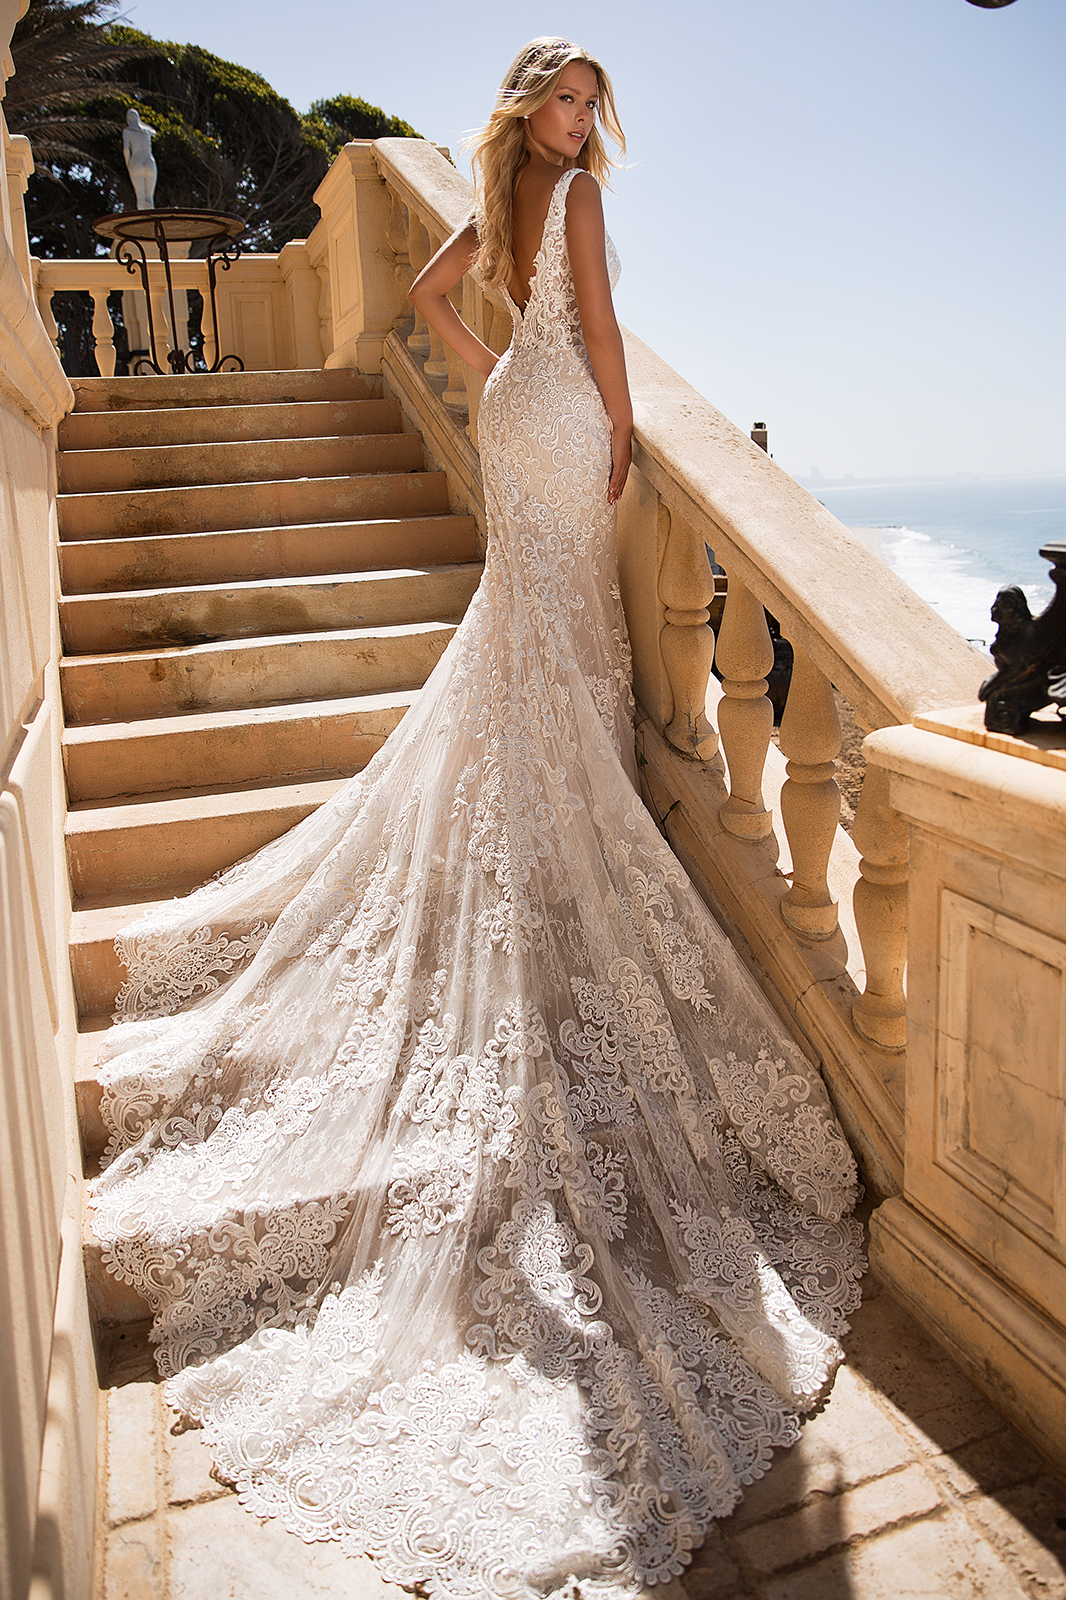 6 Modern Wedding Dress Trends You Will Love – Moonlight Couture 31